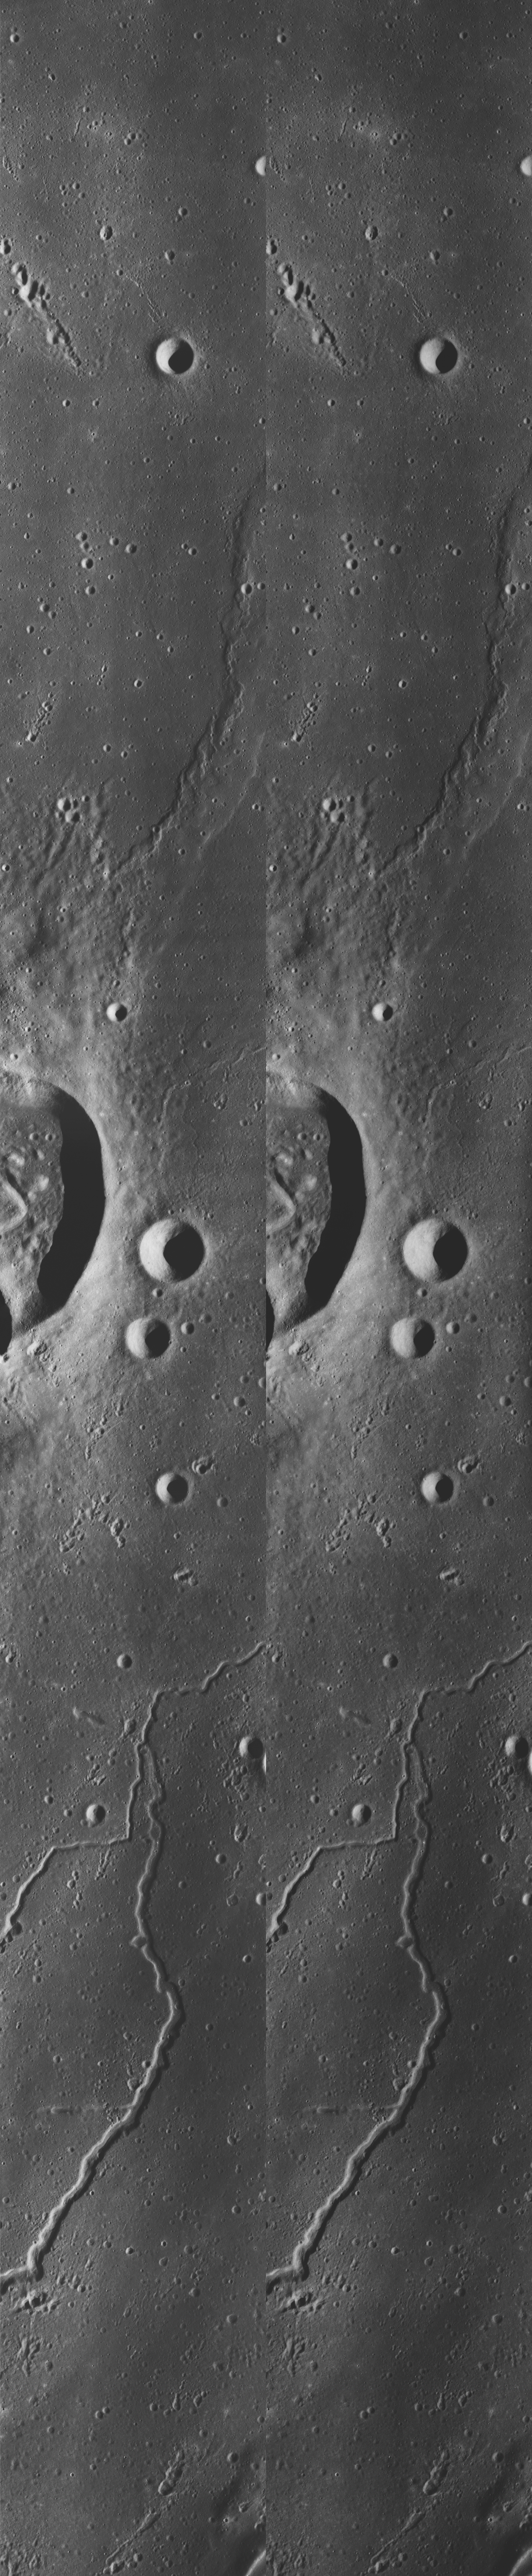 Apollo 15 Stereoscopic Panoramas featuring craters: Krieger, Rocco and Ruth. Imagery provided for cross-eyed viewing purposes.